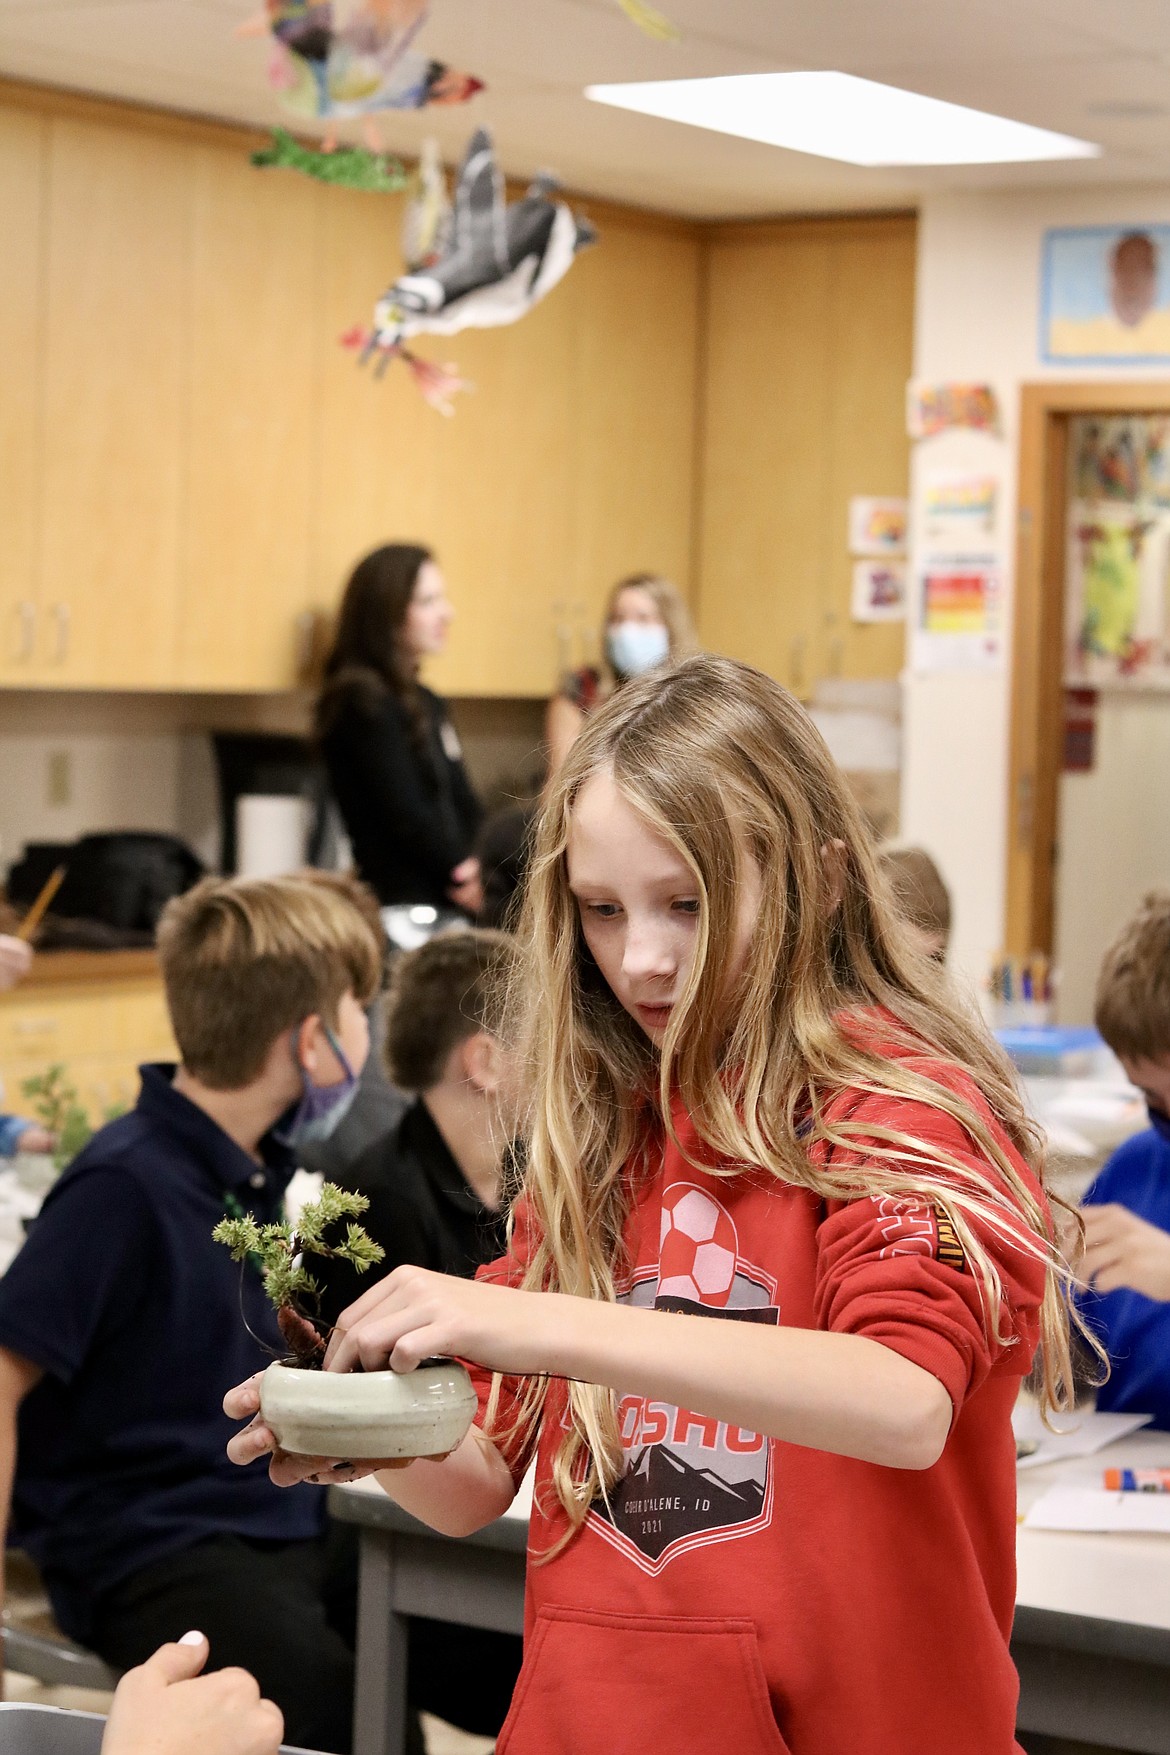 Zoey Lemmon, a fifth-grader at Sorensen Magnet School of the Arts and Humanities in Coeur d’Alene, eyes her freshly potted bonsai tree on Thursday after learning how to style and care for the plant from Robert and Jordan Gray of Gray to Green Nursery in Cougar Gulch. HANNAH NEFF/Press